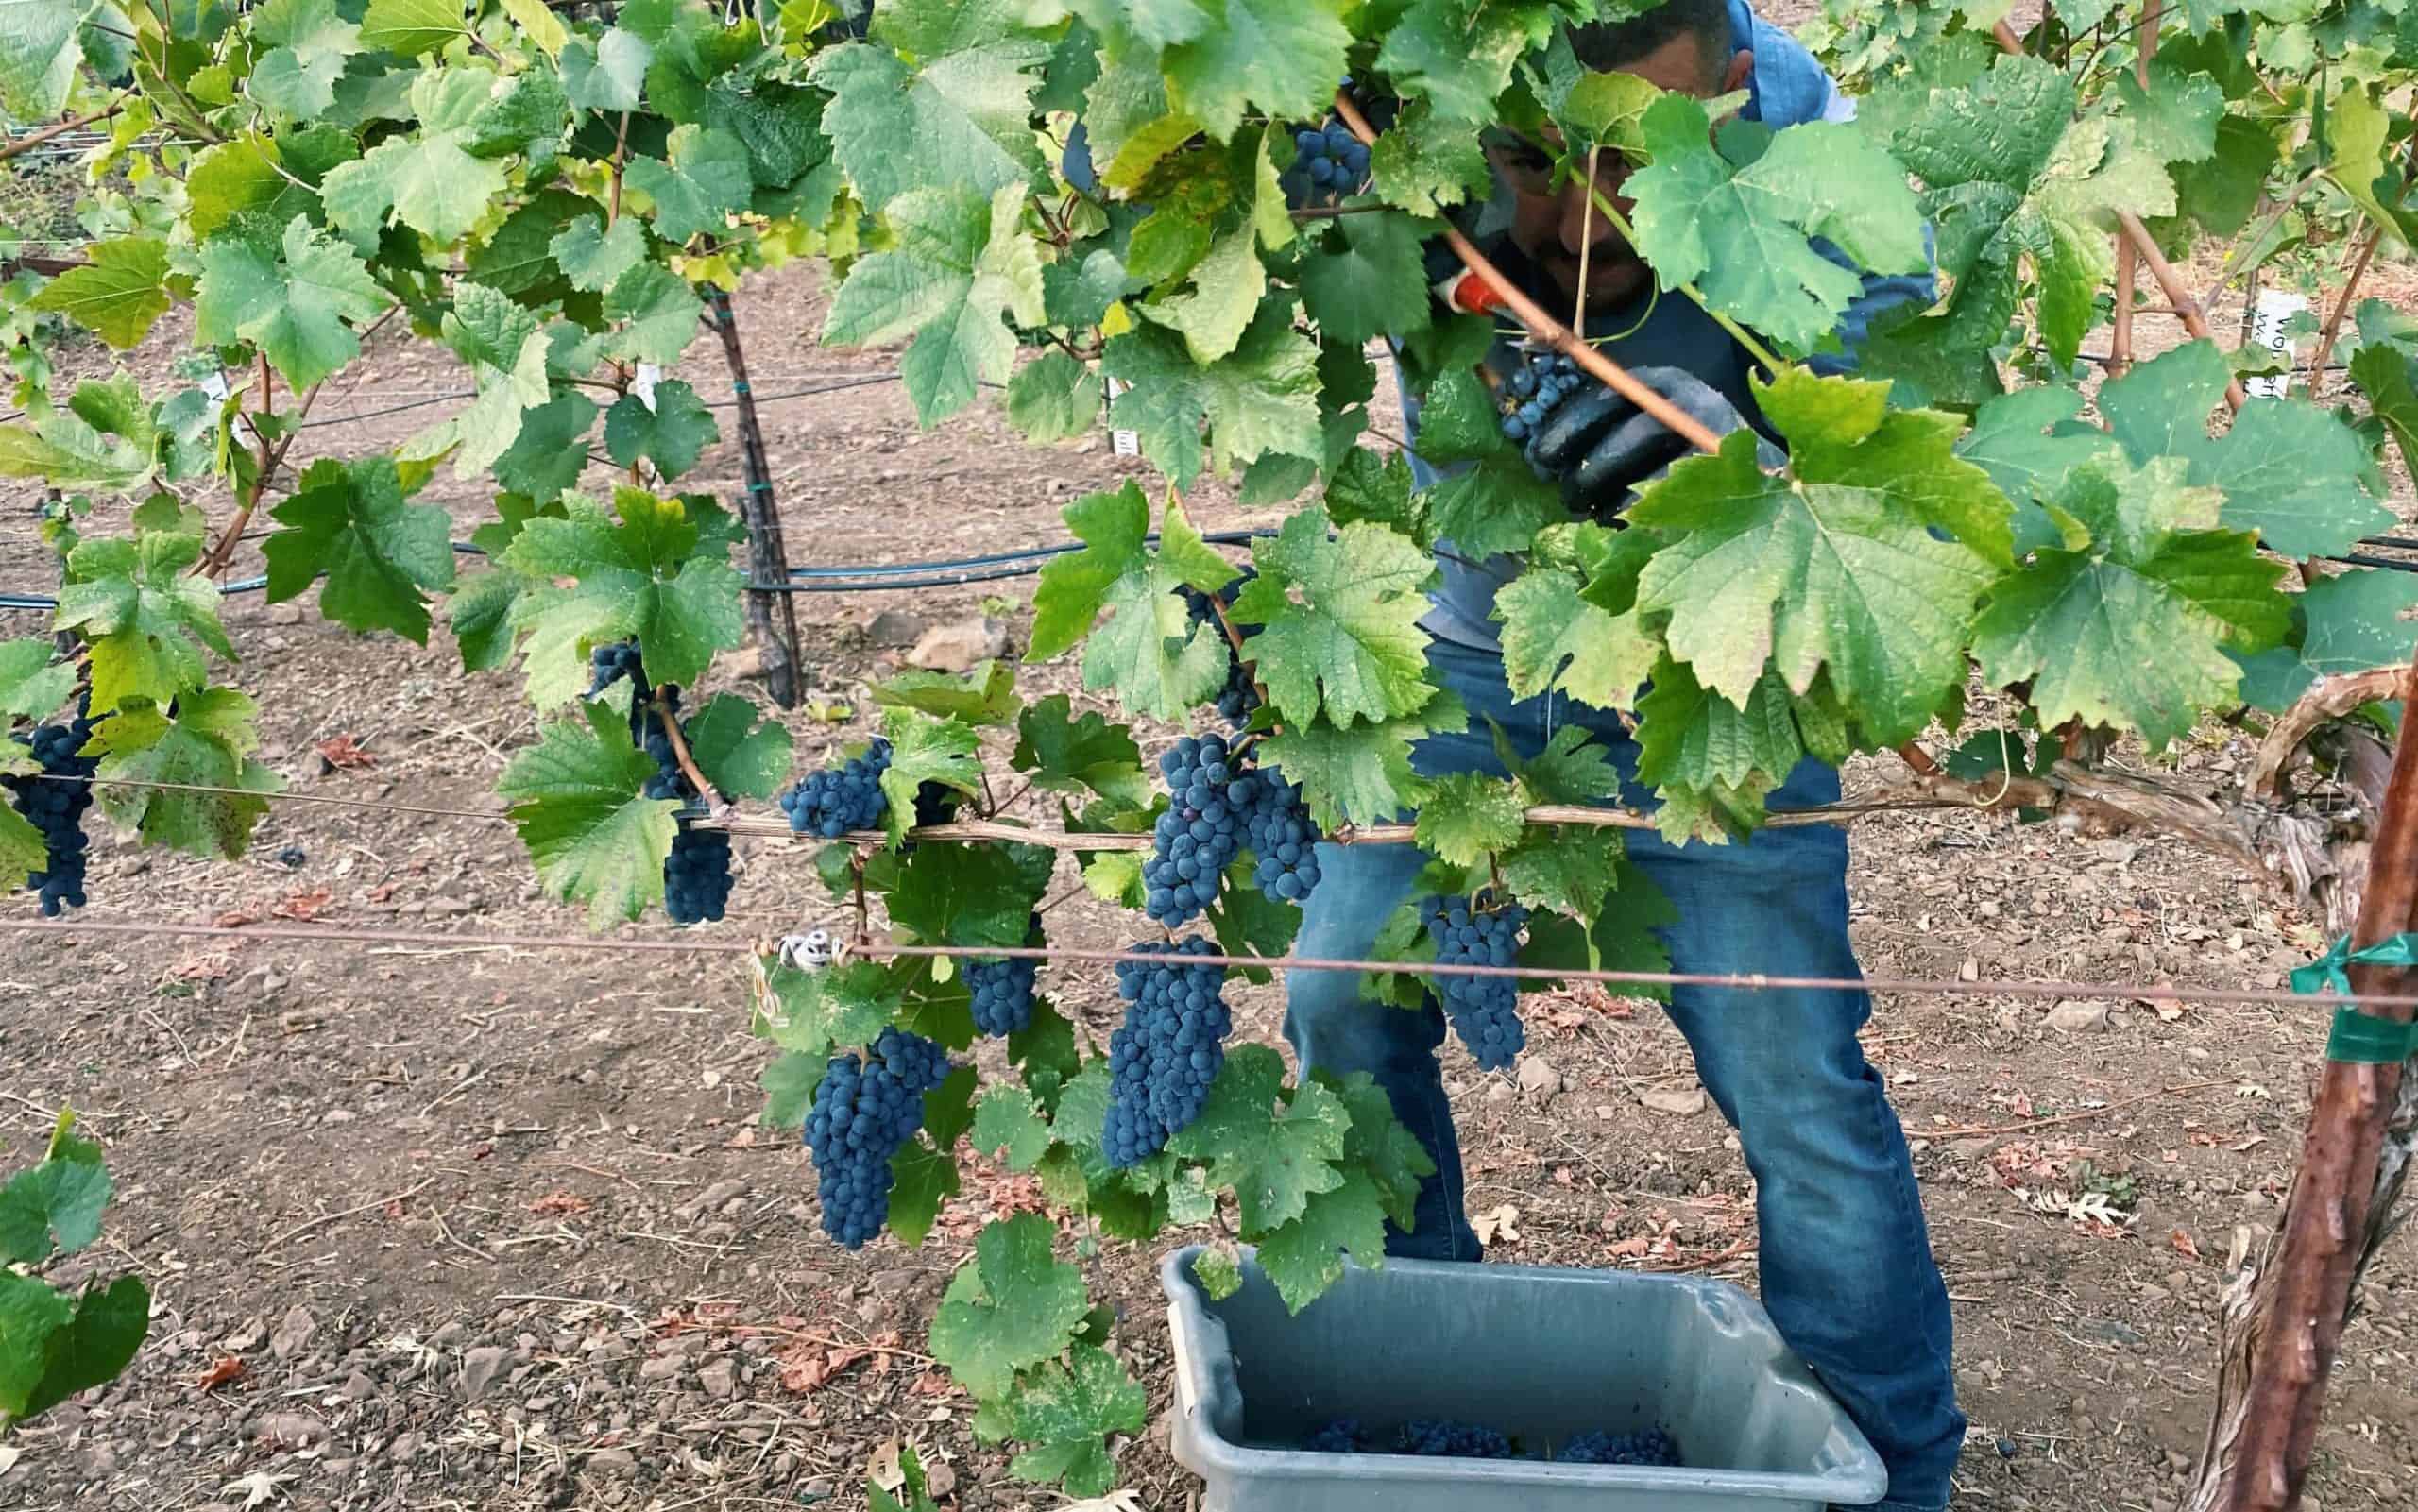 working among the vines